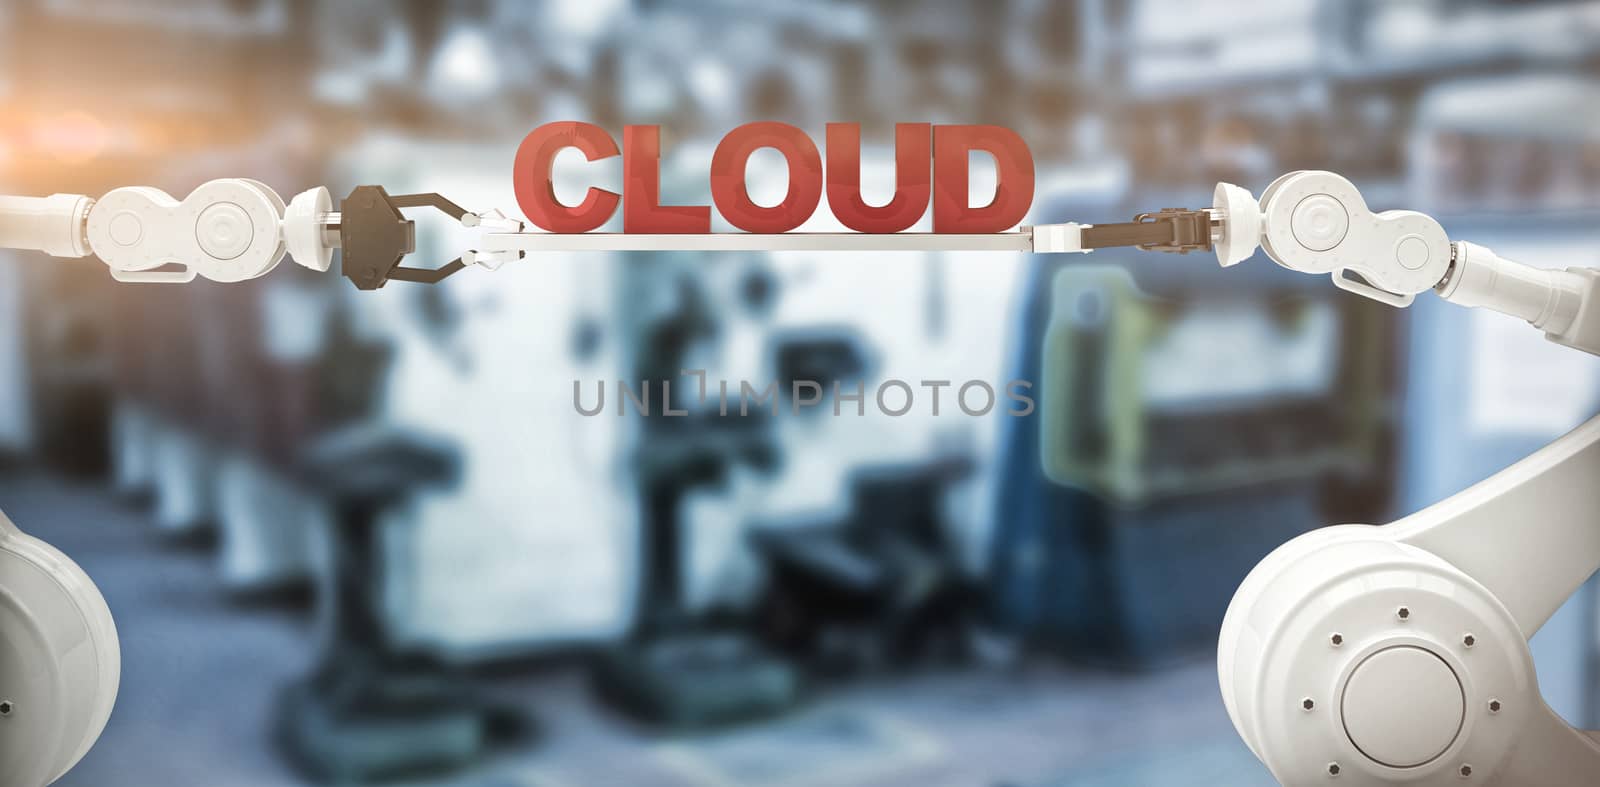 Digitally composite image of robotic hands holding cloud text against workshop